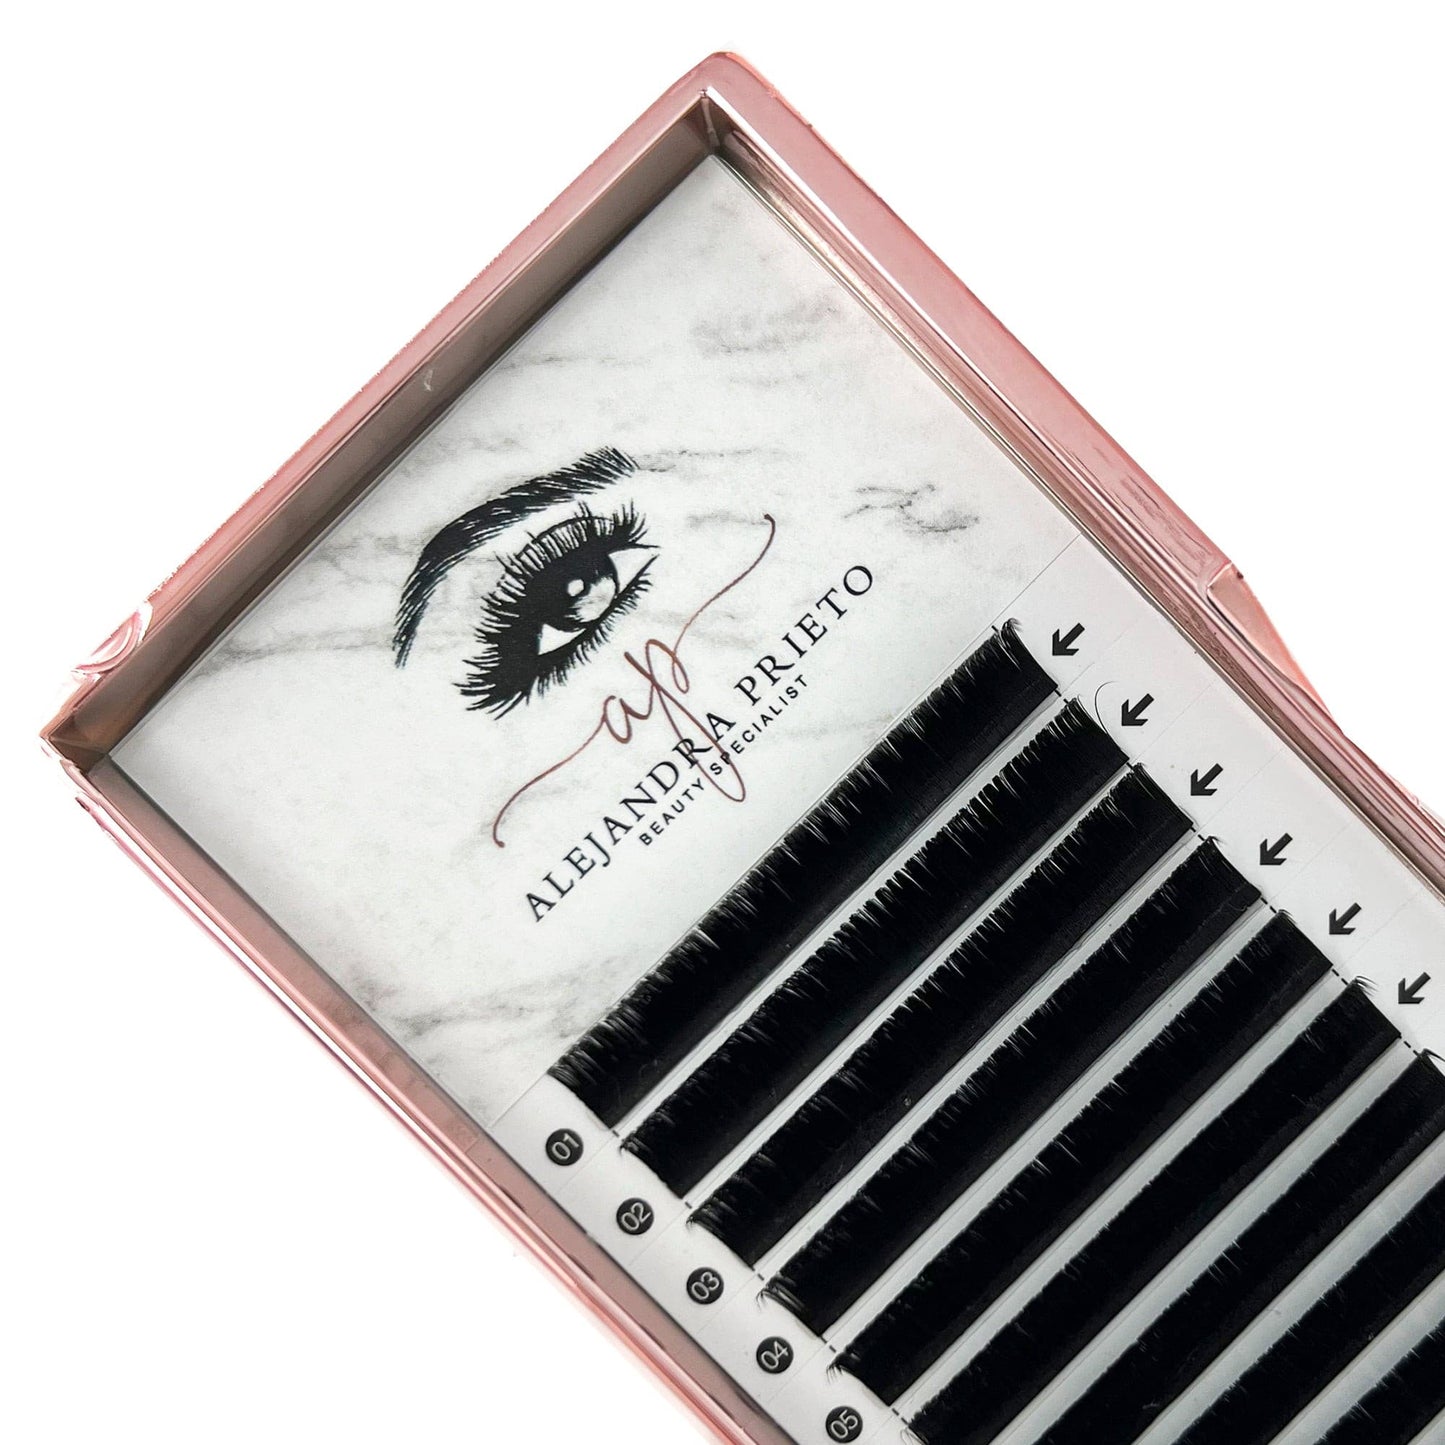 Self-Fanning Lashes by Ale Prieto